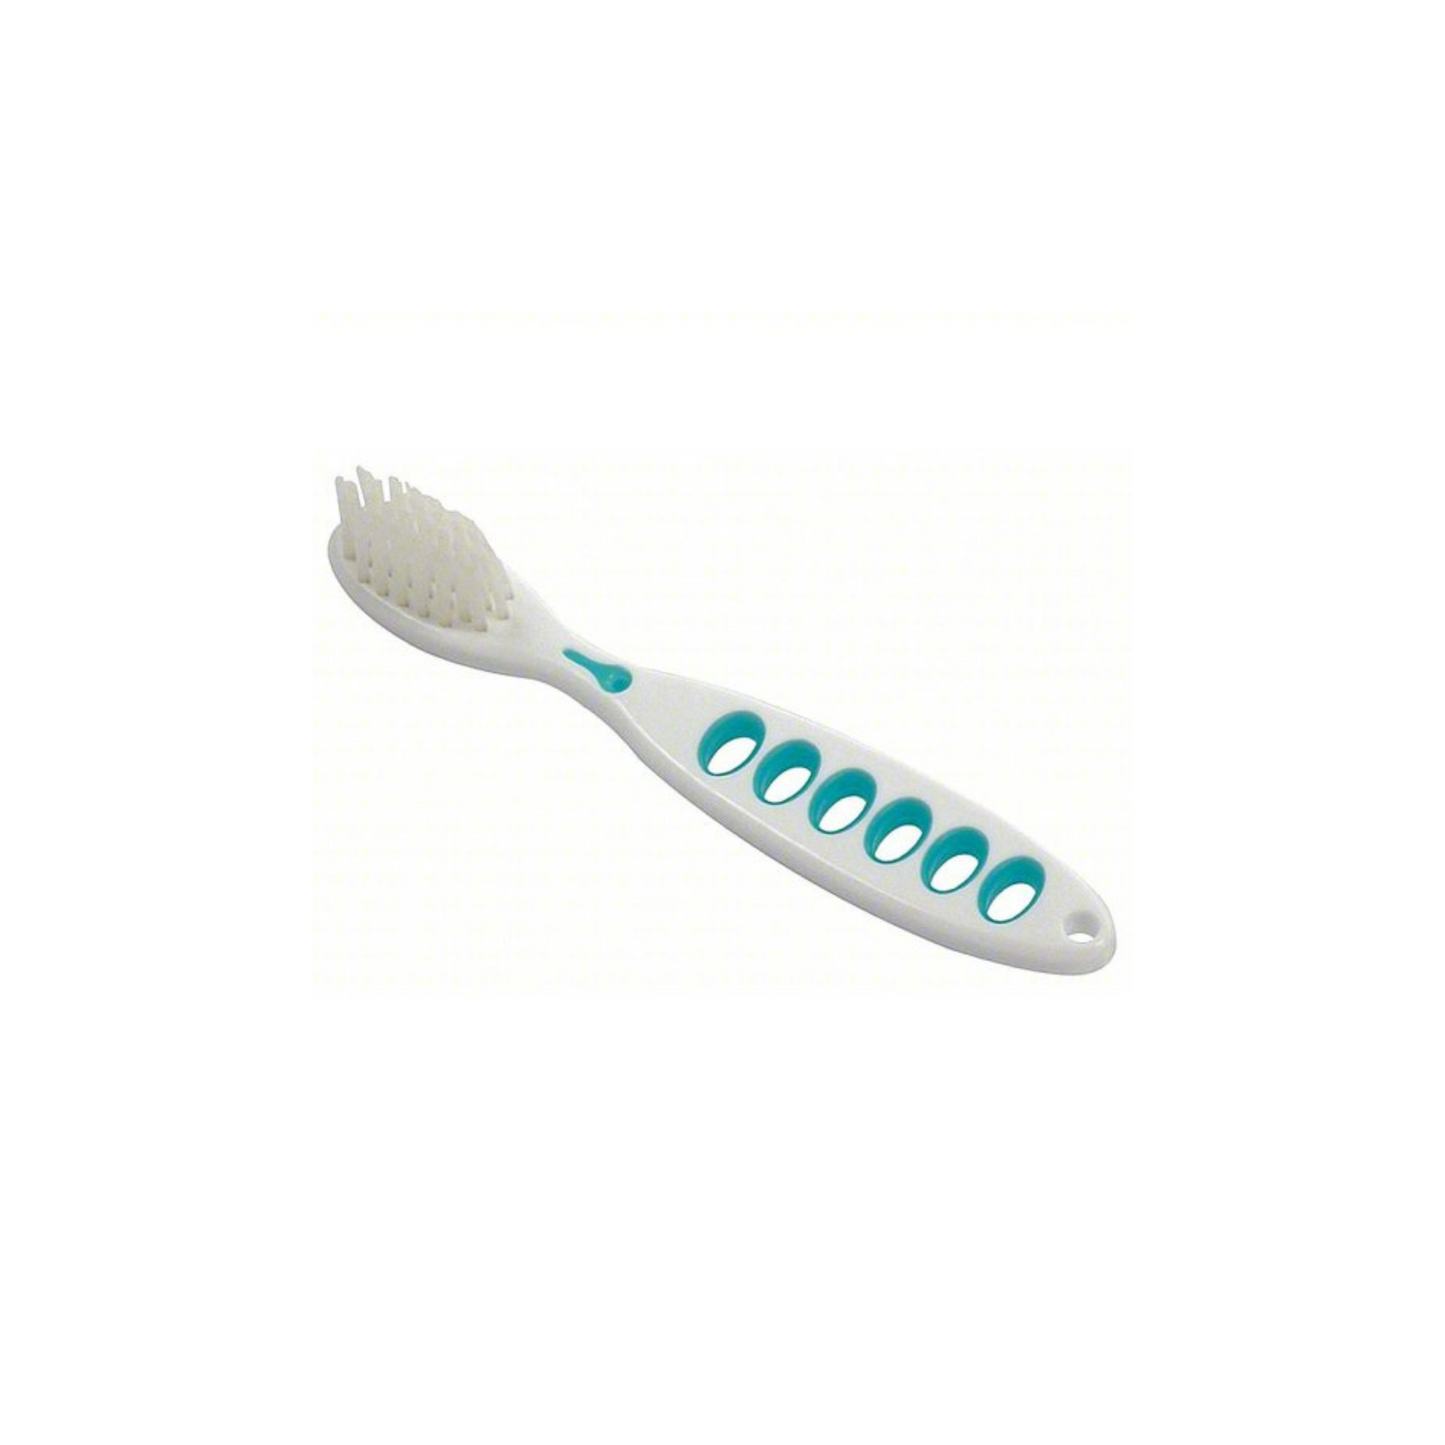 Cortech - Ultralight Plus Backpacking Tooth brush